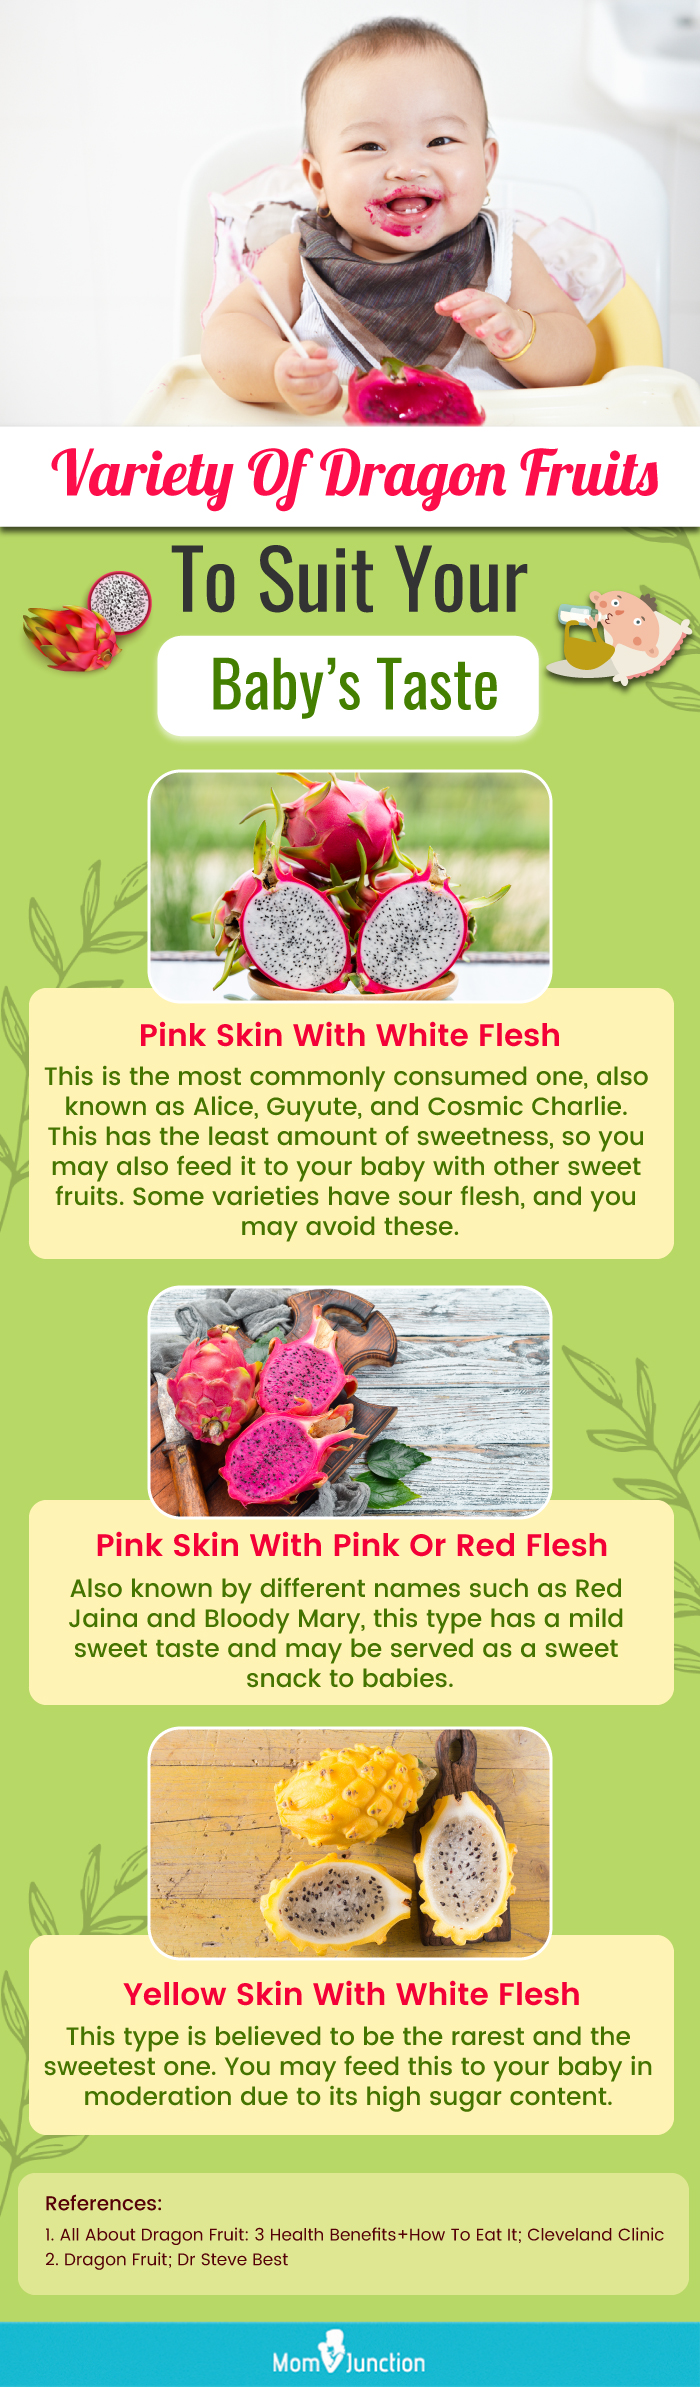 variety of dragon fruits to suit your babys taste (infographic)